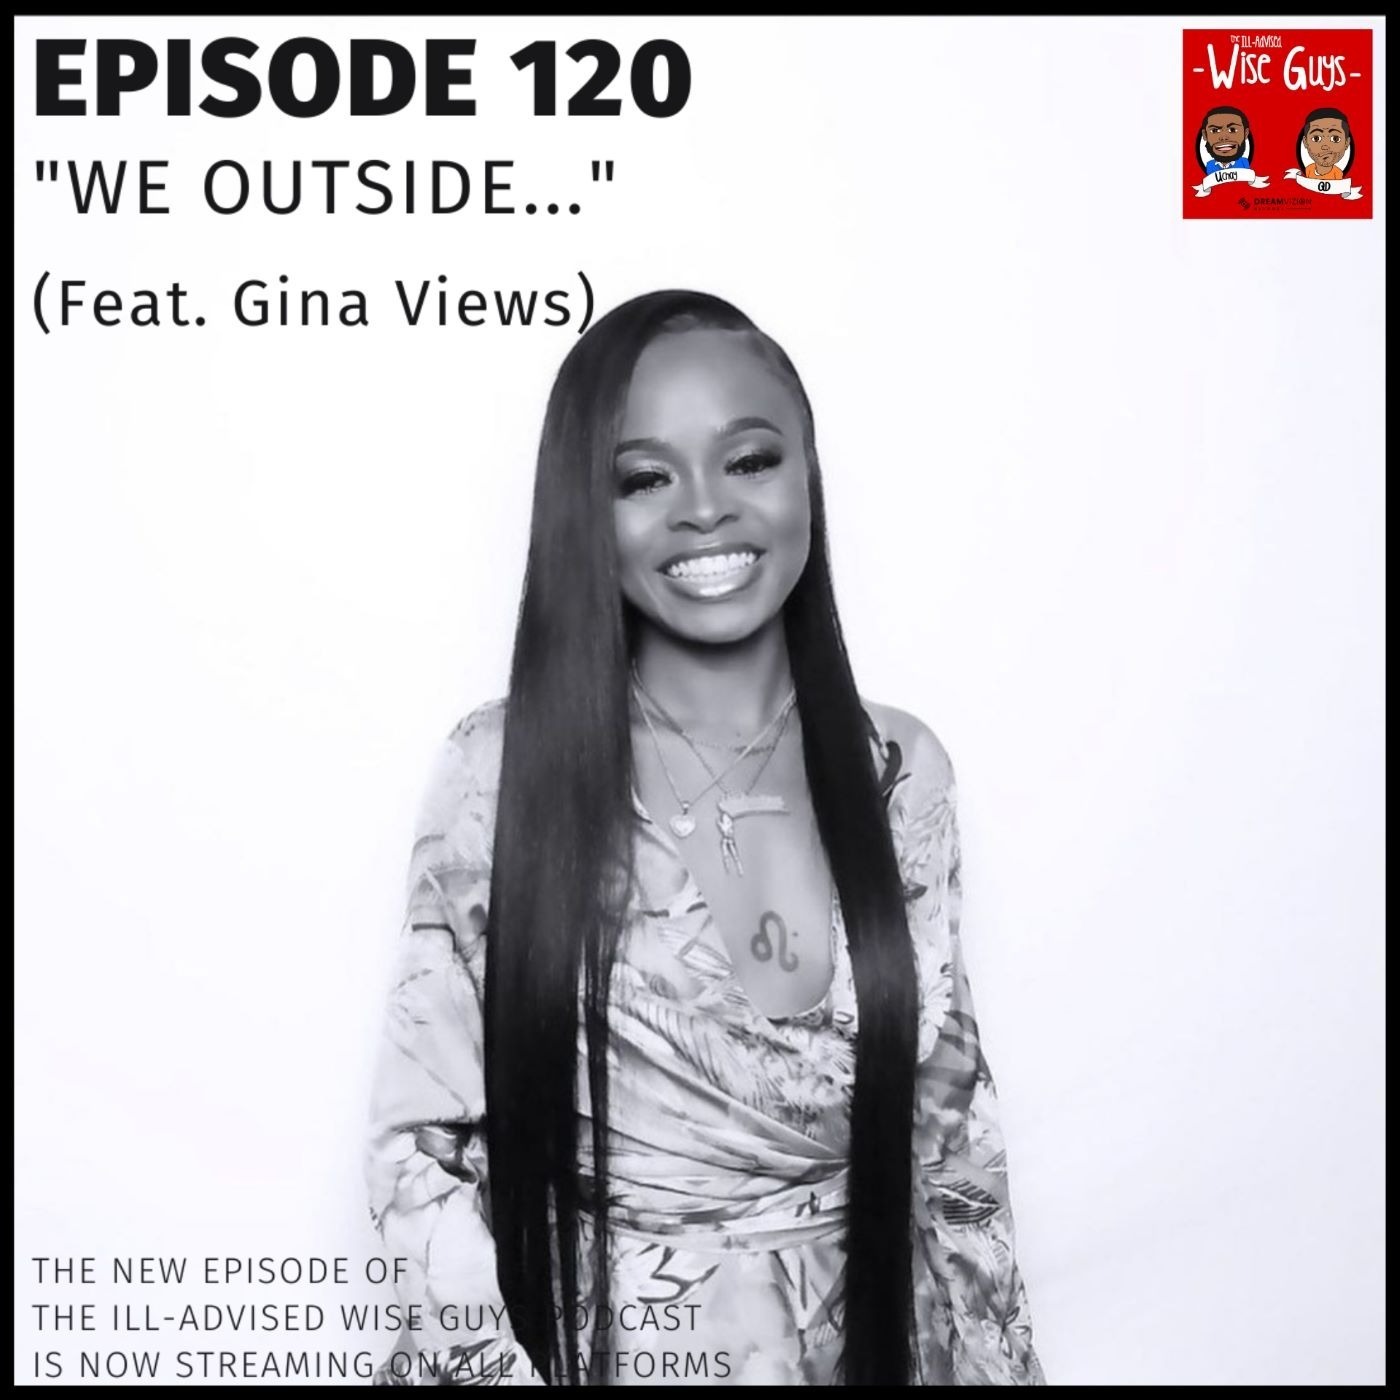 Episode 120 - "We Outside..." (Feat. Gina Views) Image